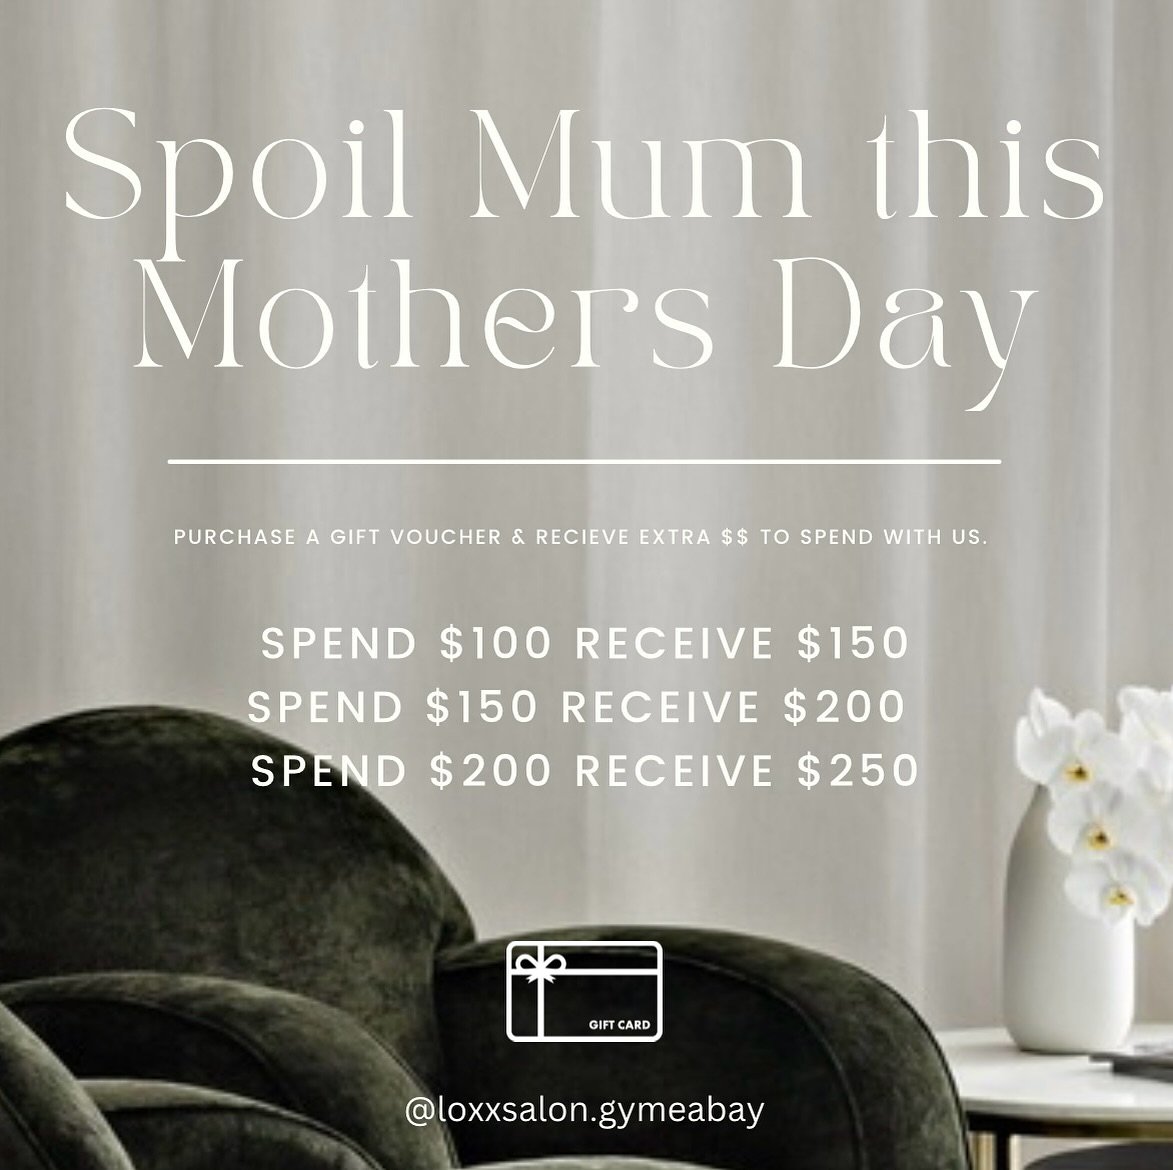 Spoil Mum this Mother&rsquo;s Day! 🤍 

Spend &amp; Save $$ when you purchase a gift voucher with us! Limited quantities available with selected stylists. Available for purchase until Sunday. 

Gift vouchers can be purchased online via the link in ou